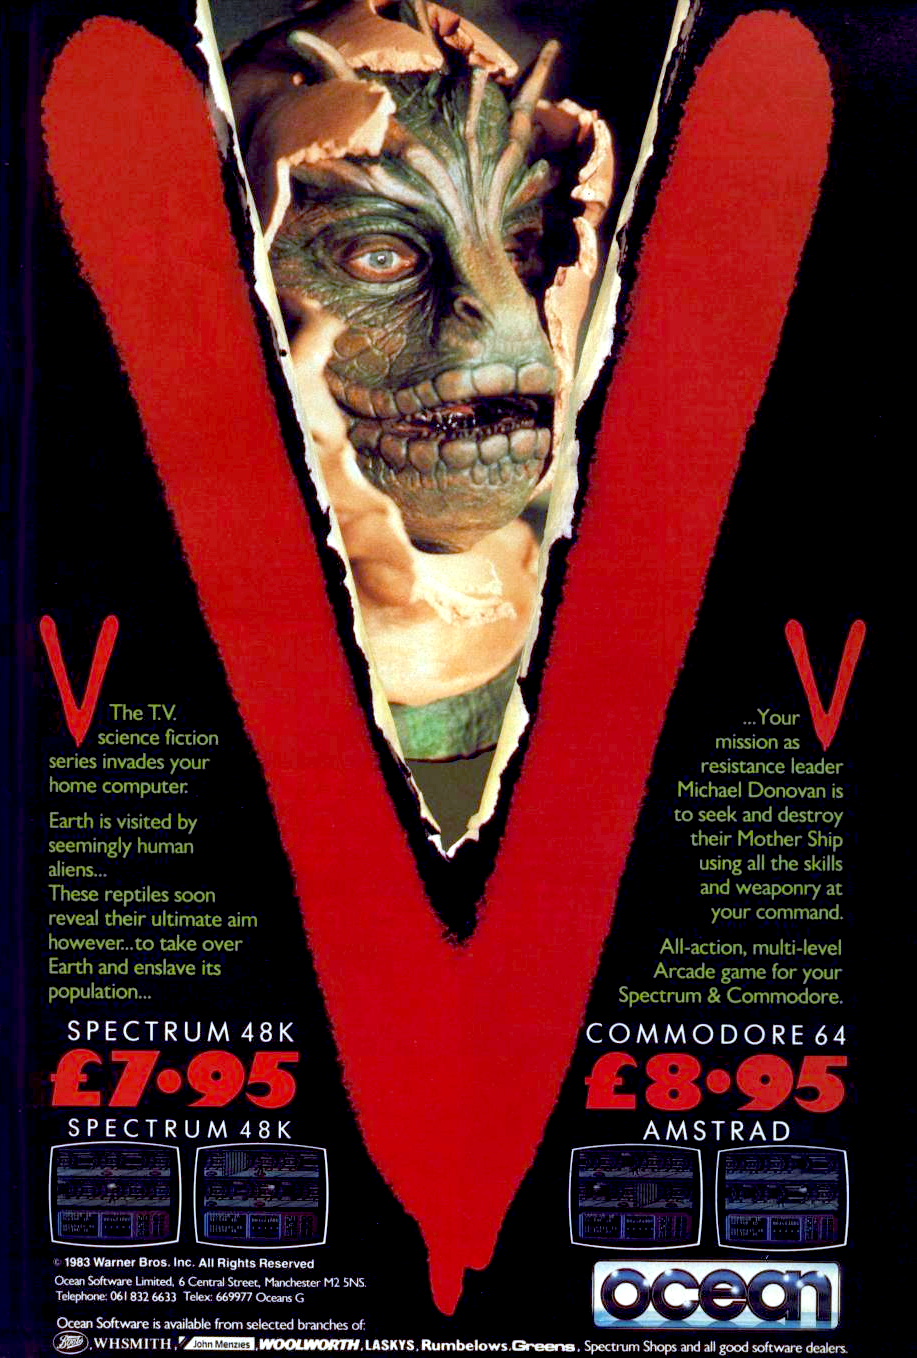 Image For Post | **Description**  
There were two popular sci-fi television miniseries called V in 1983 and V: The Final Battle in 1984 which led to one season of a television weekly series also in 1984-1985. The plot involved an alien invasion of Earth by a reptilian race known as "The Visitors". In this game, you play as Mike Donovan, a resistance leader who enters the visitors' huge spaceship in order to blow up its reactor by setting explosives at key points.

The aliens will try to stop you as will surveillance, cleaner, maintenance, and security robots. If you touch any robots or are shot by them, a static charge will cause your hearbeat to increase. If this happens several times you have to rest or it could kill you. In 8 different laboratories you will find formulas for Red Dust which is lethal to the aliens - releasing it into air purification plants will kill many of them and also slow the robots. You can use a laser or when its charge runs out, you can jump over or roll under enemies.

The gamescreen has three sections. The middle and upper are corridors you are going through and one above or below you. The bottom of the screen is a communiputer with various sections. One allows you to monitor the aliens' messages and to send messages of your own to confuse them; another shows your score and time remaining, and levels of health and laser power. There's a six-button menu: pause/quit, ship info, lay explosives, return to game, display secury code, and info on anti-Visitor red dust formula. Also, there's six number keys (the aliens count in base 6) which you need to type in security codes to unlock doors. You can also move between levels using teleport pads. Finding the key points in the ship is crucial before you set the explosives which will be on a timer so you have a chance to get out before they blow the ship up.